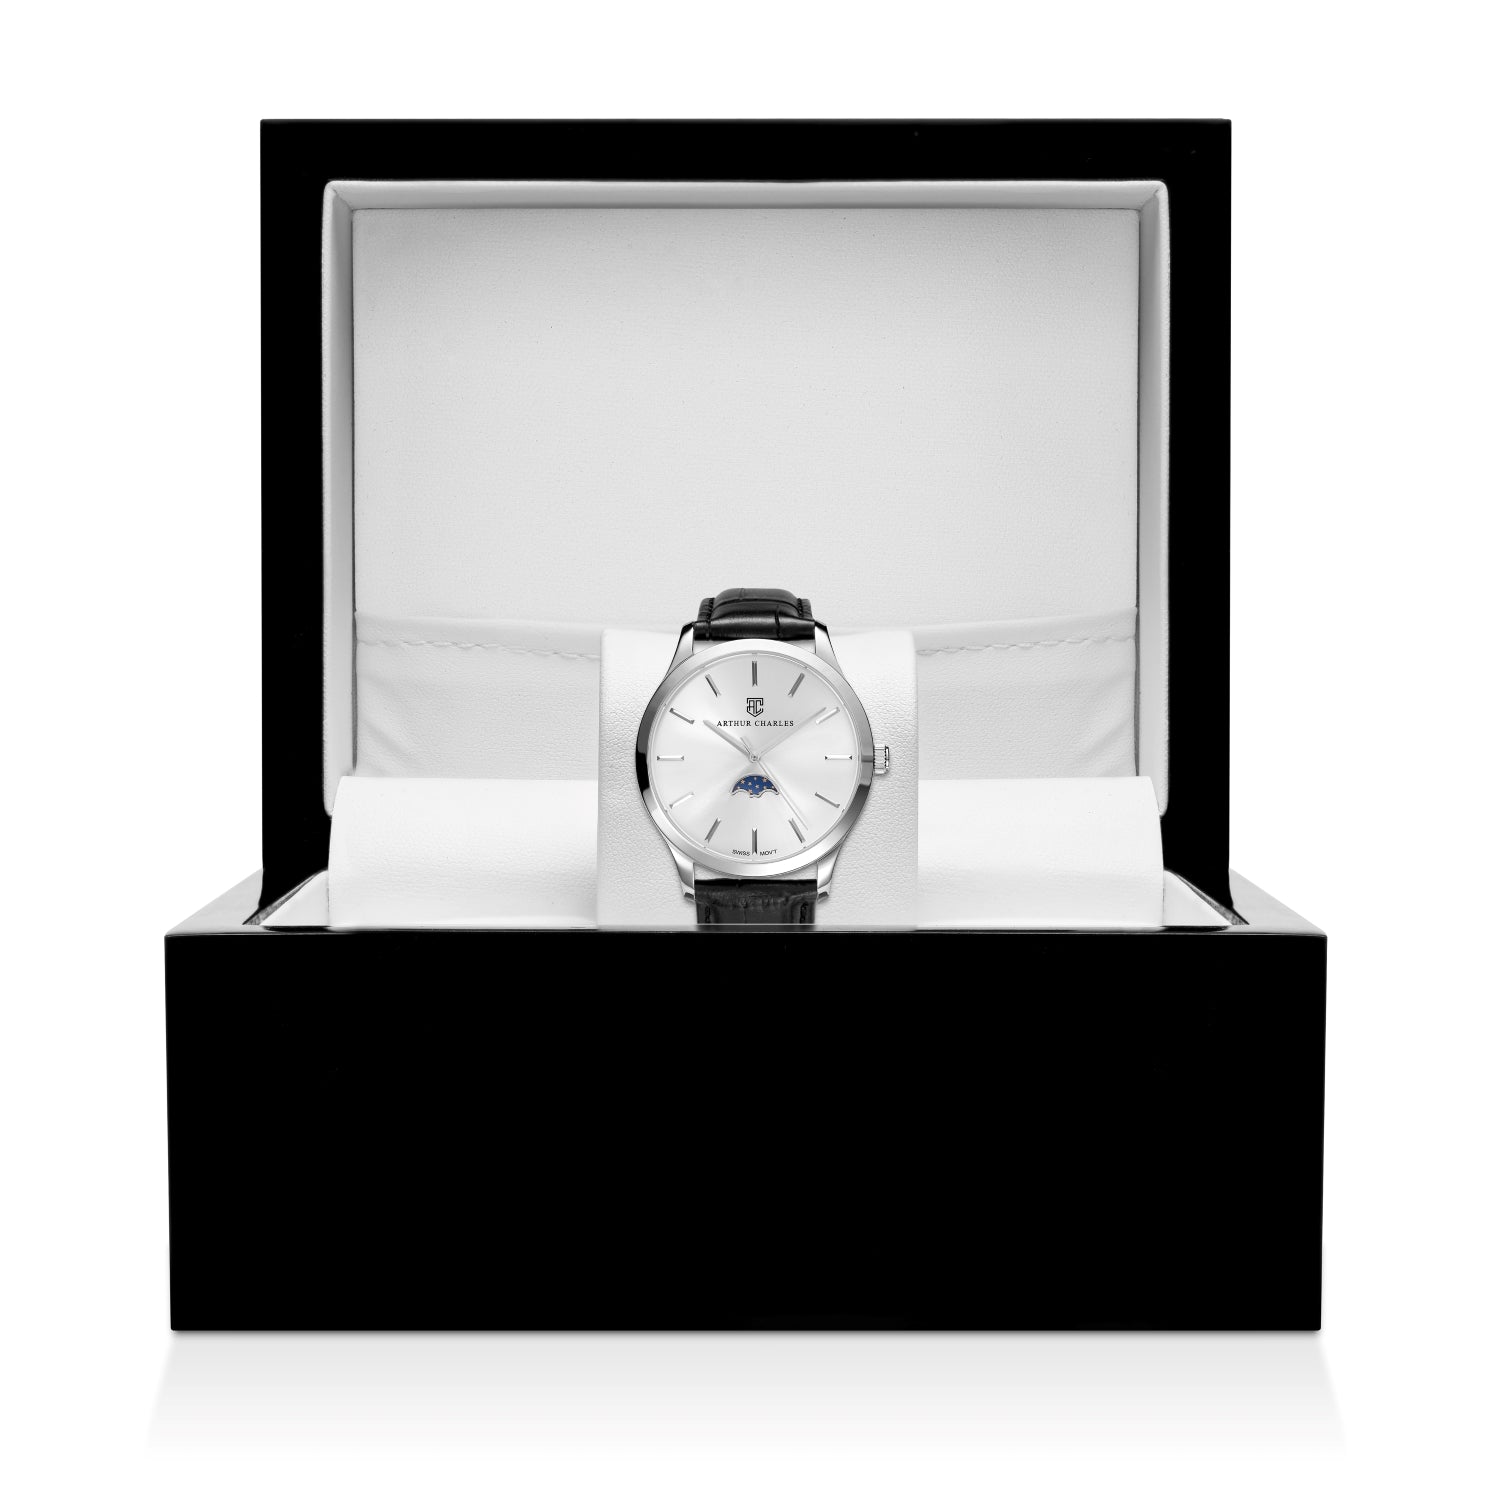 Image of the Moonphase watch in packaging box. This watch features swiss movement and moonphase complication with leather strap.